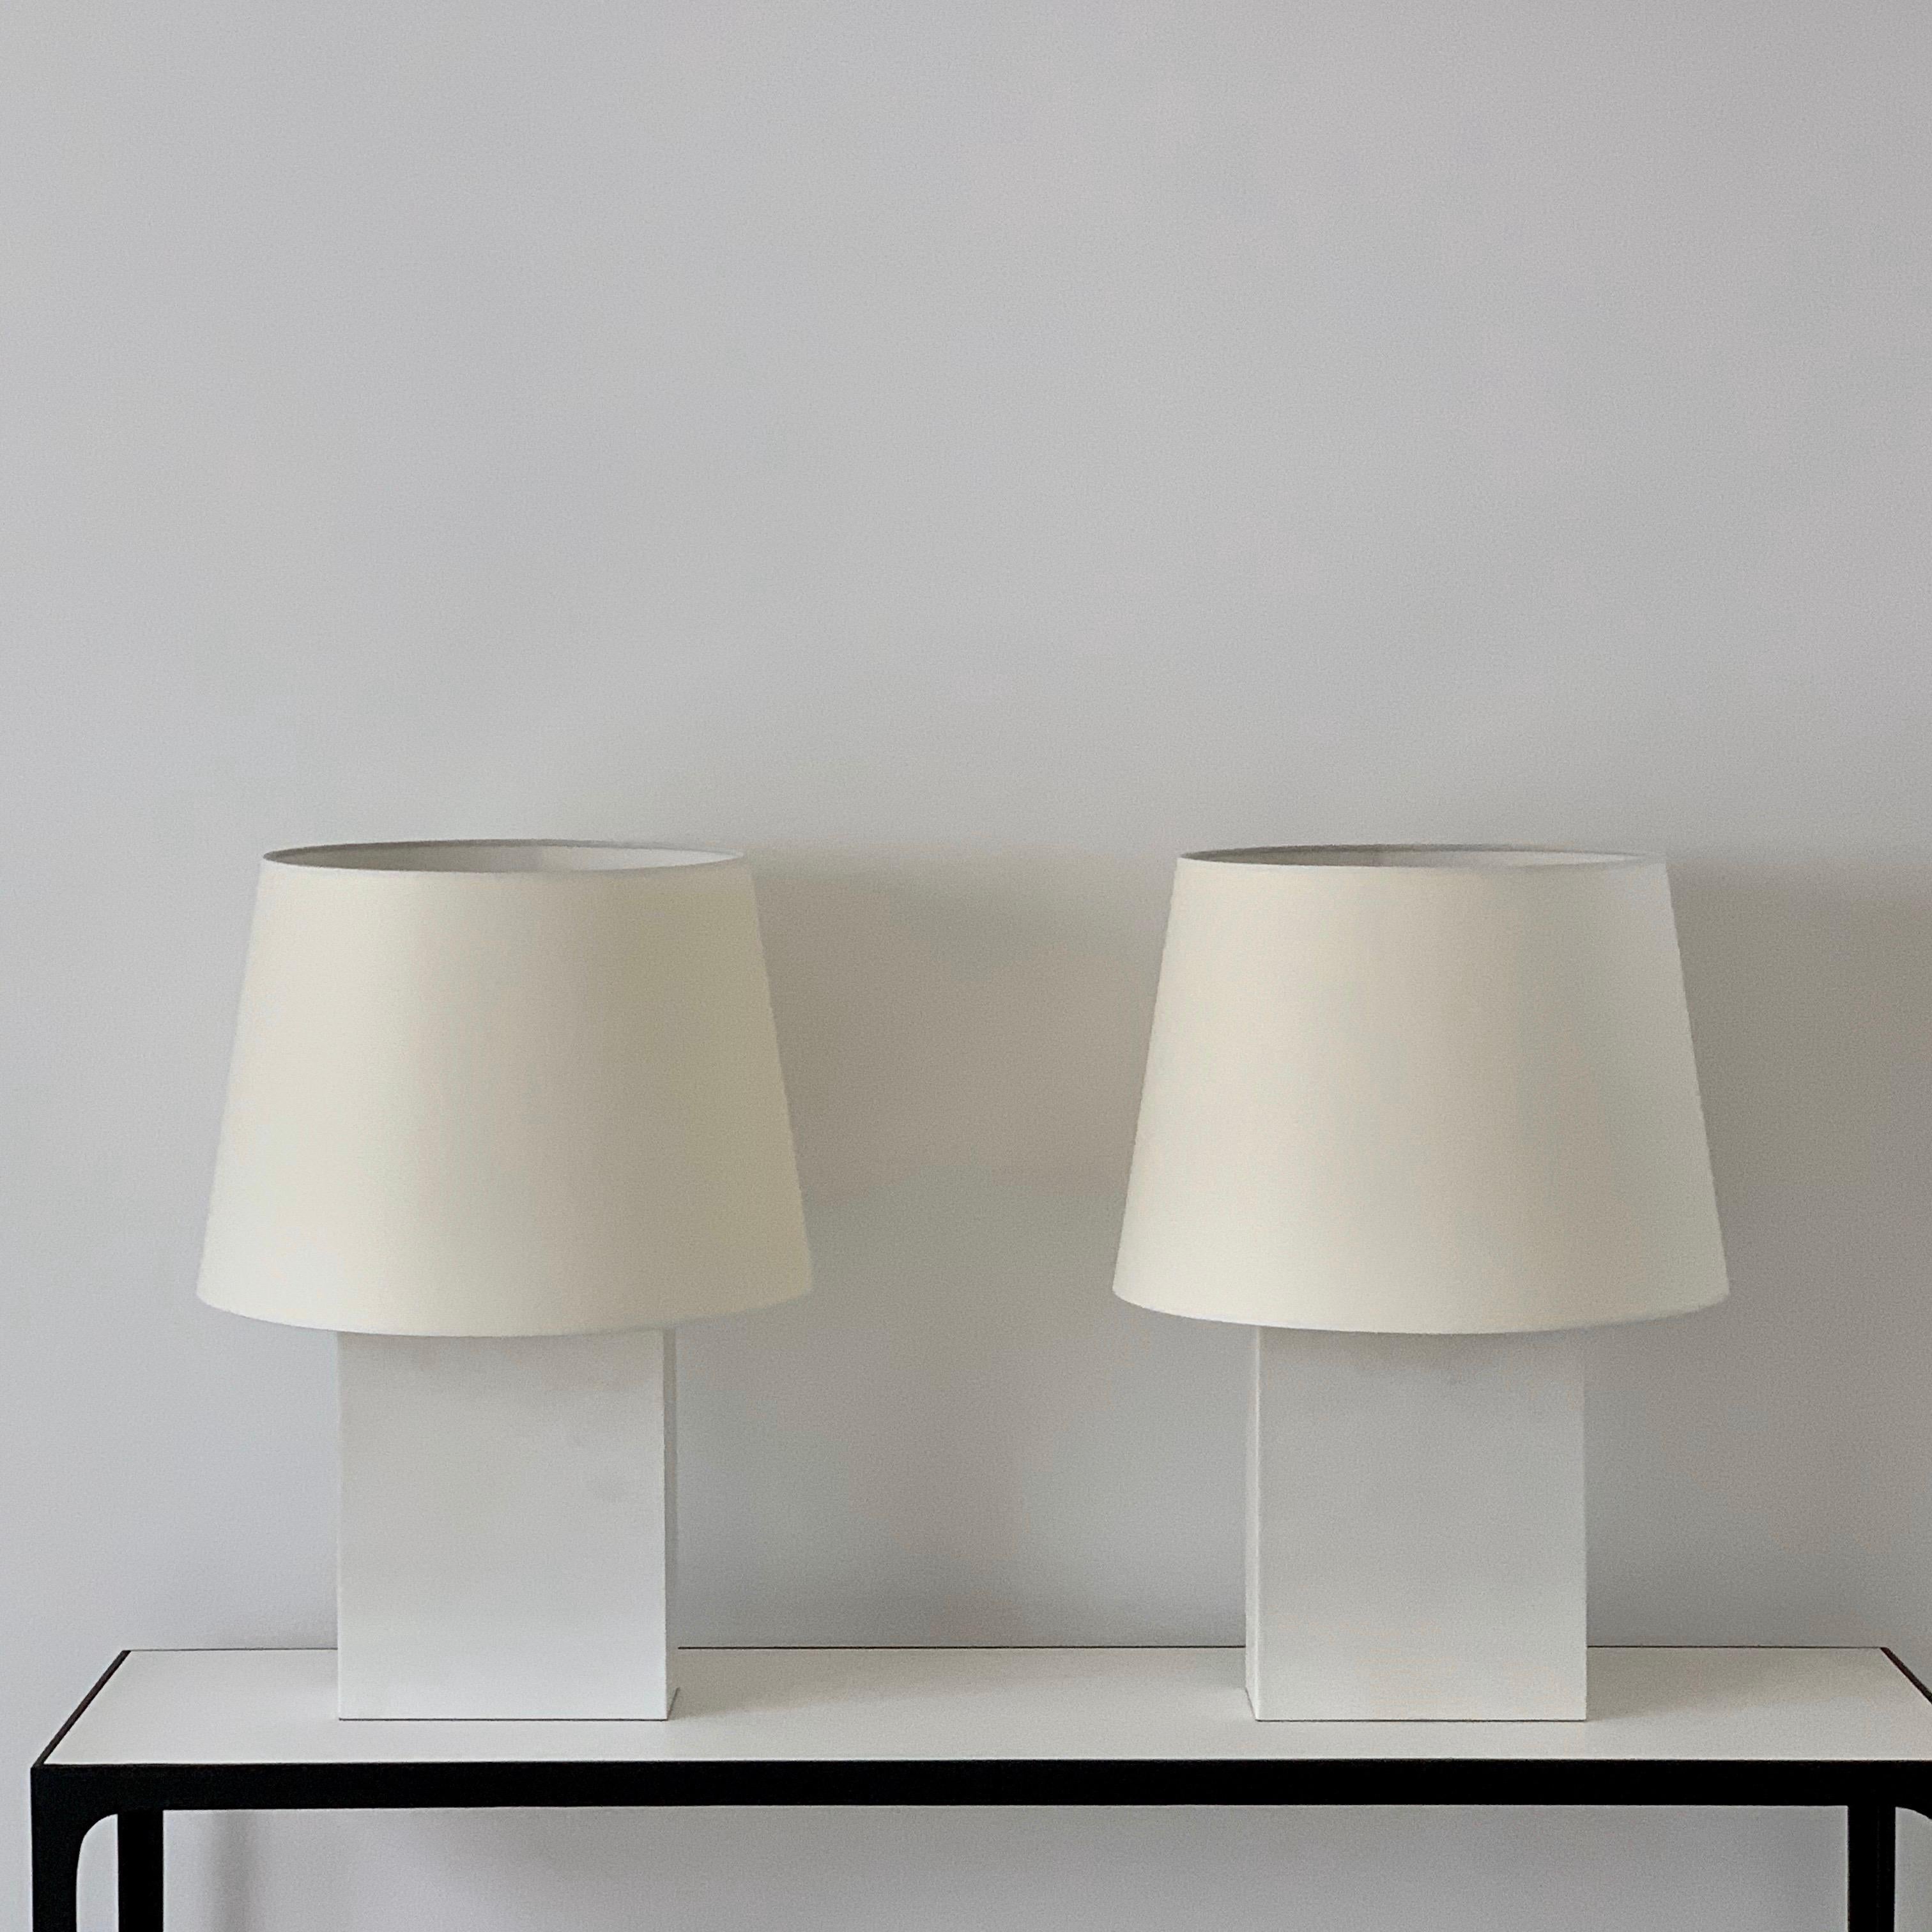 Pair of large 'Bloc' parchment lamps by Design Frères.

Attractive European style shade mounts with no apparent harps / finals. Come with the matching custom parchment paper shades shown.

Handmade with real goatskin parchment and wired with UL